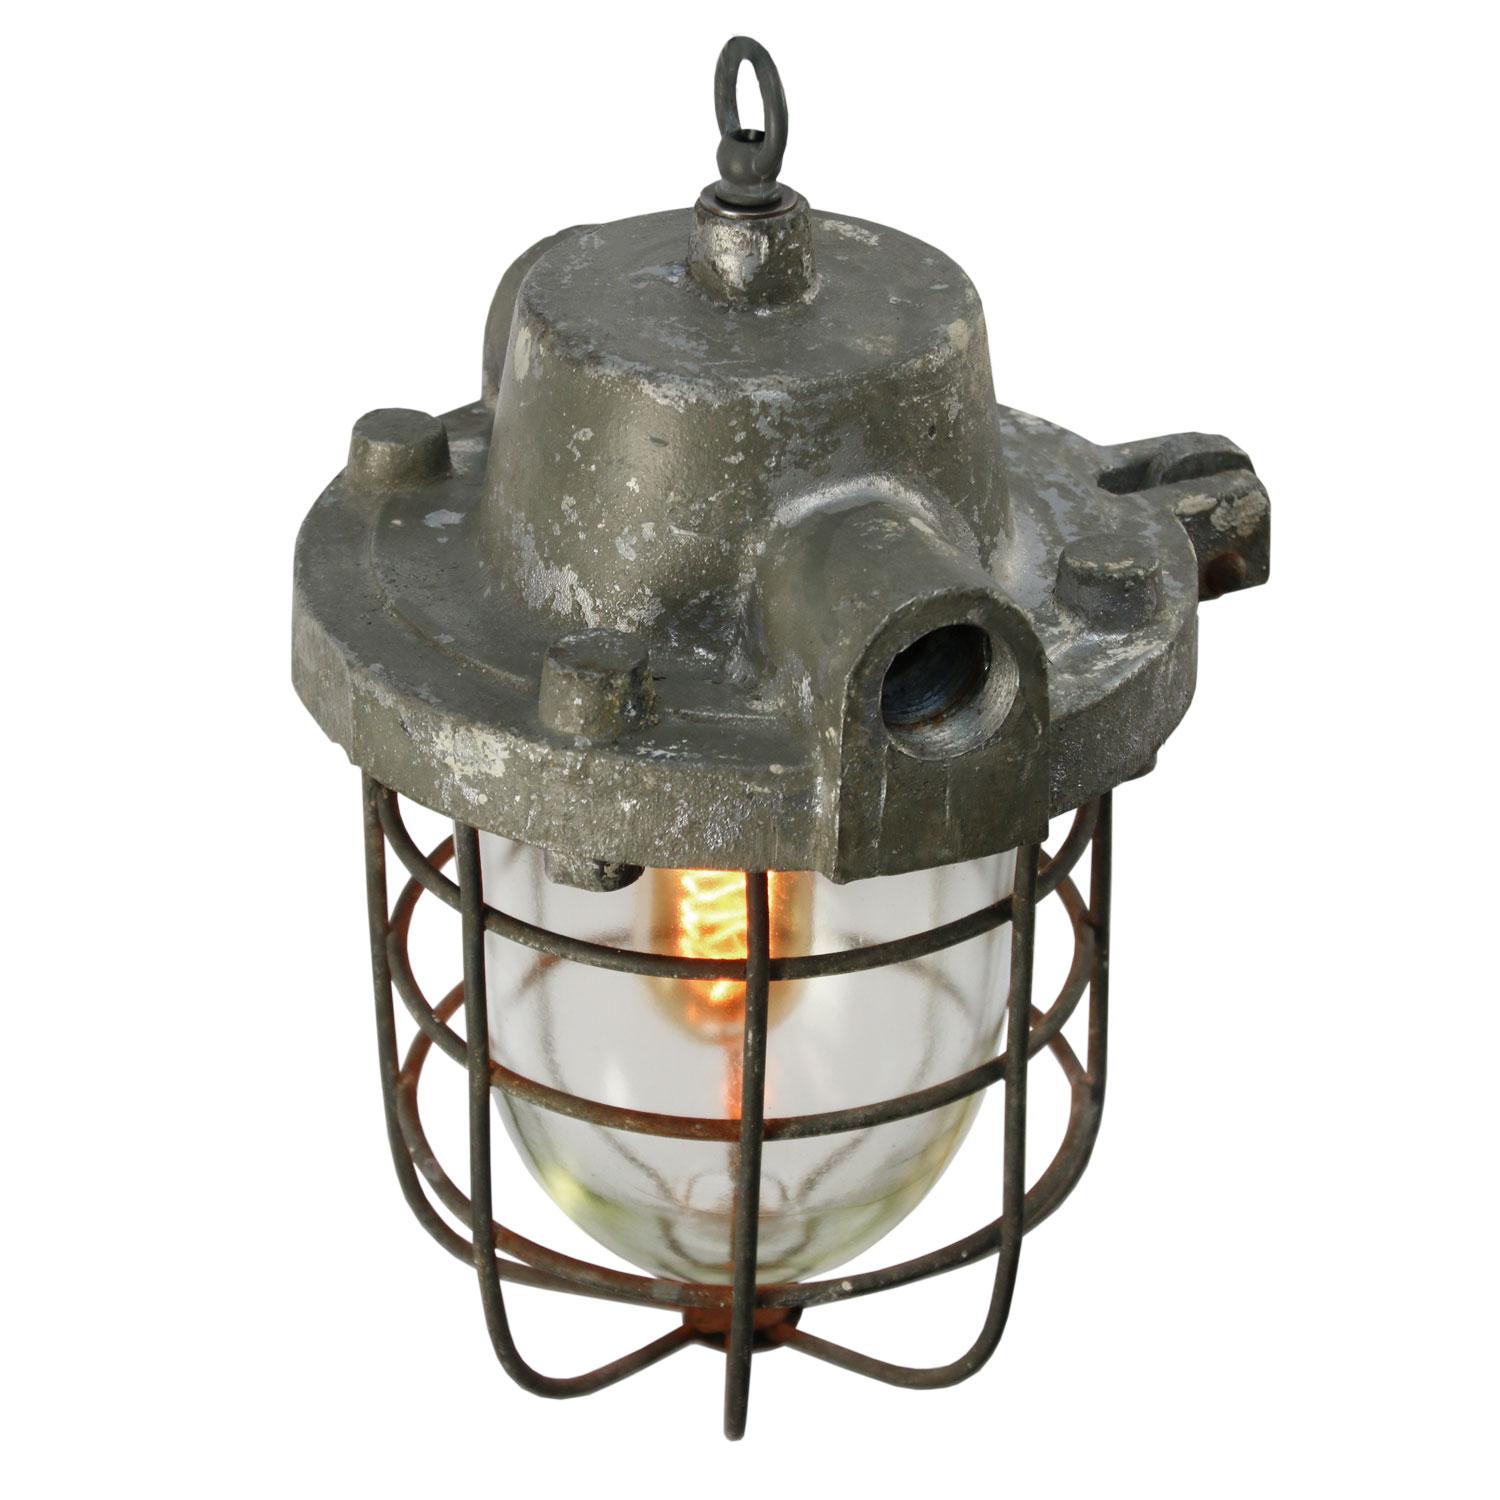 Vintage European industrial pendant
Cast aluminum top, clear glass

Weight: 4.81 kg / 10.6 lb

Priced individual item. All lamps have been made suitable by international standards for incandescent light bulbs, energy-efficient and LED bulbs.